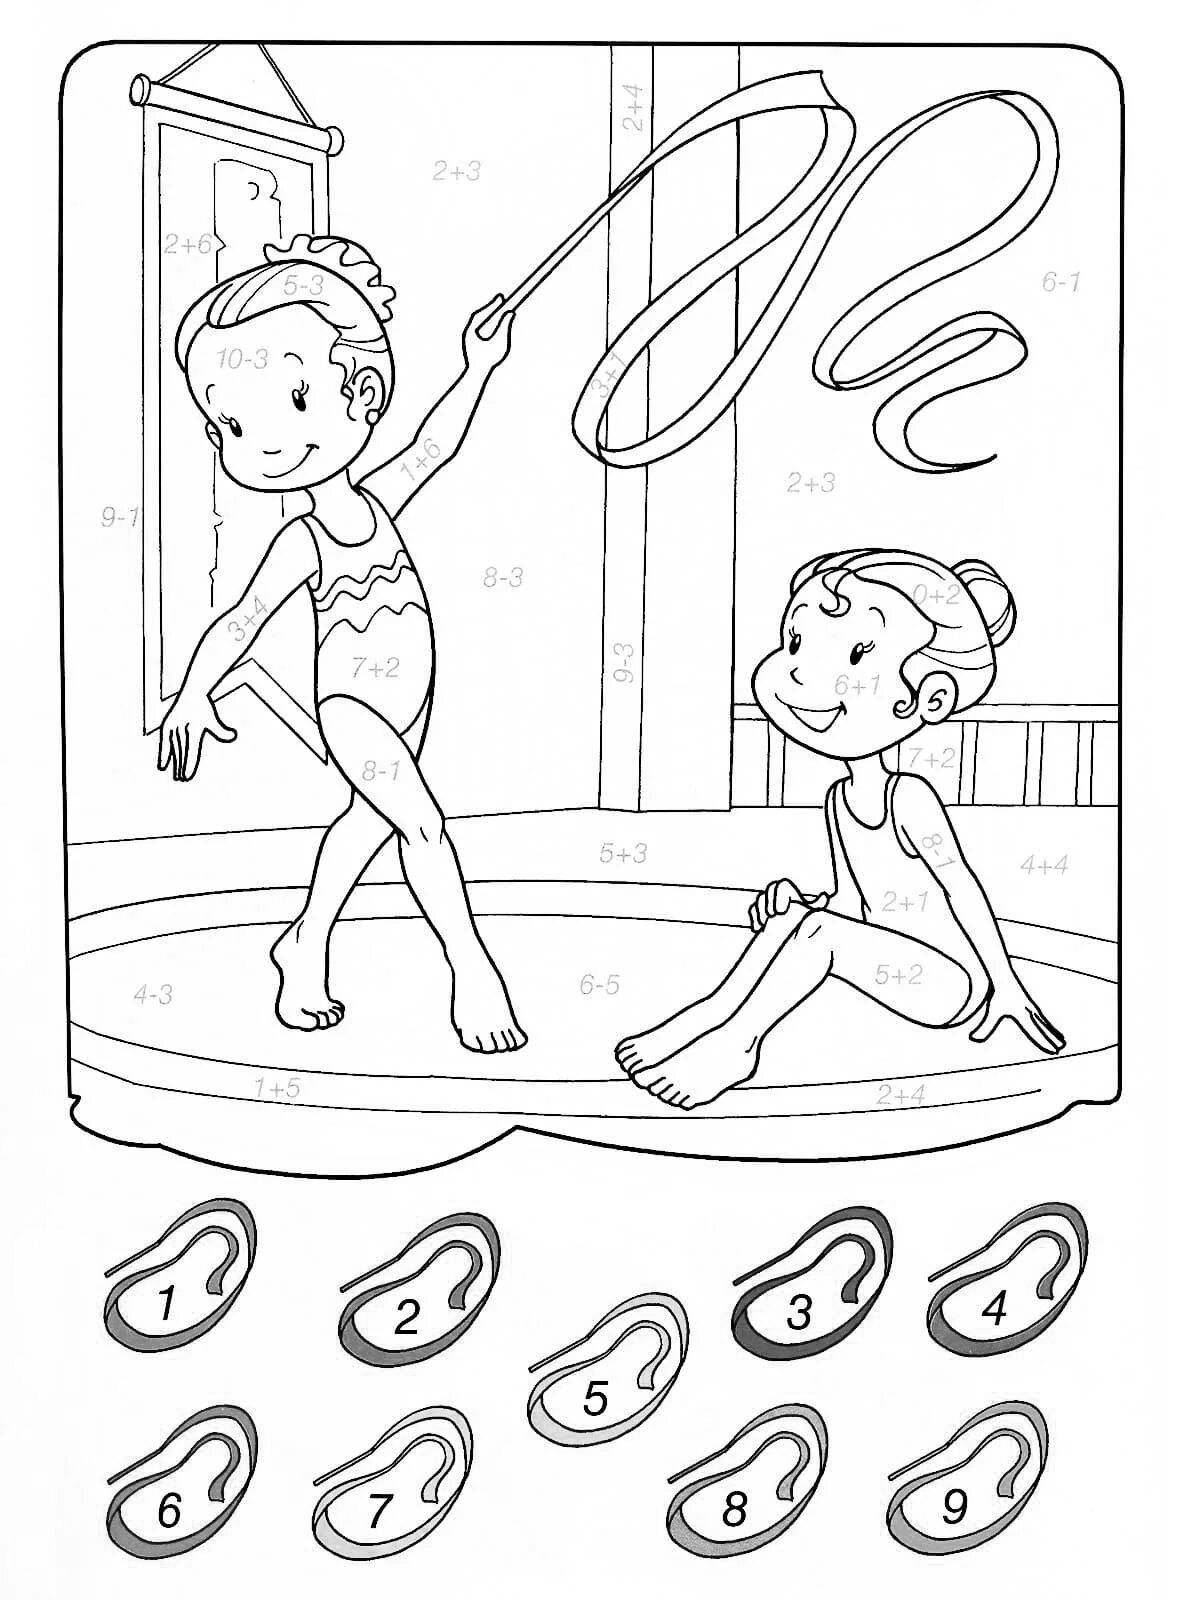 Joyful sports coloring book for kids 4-5 years old